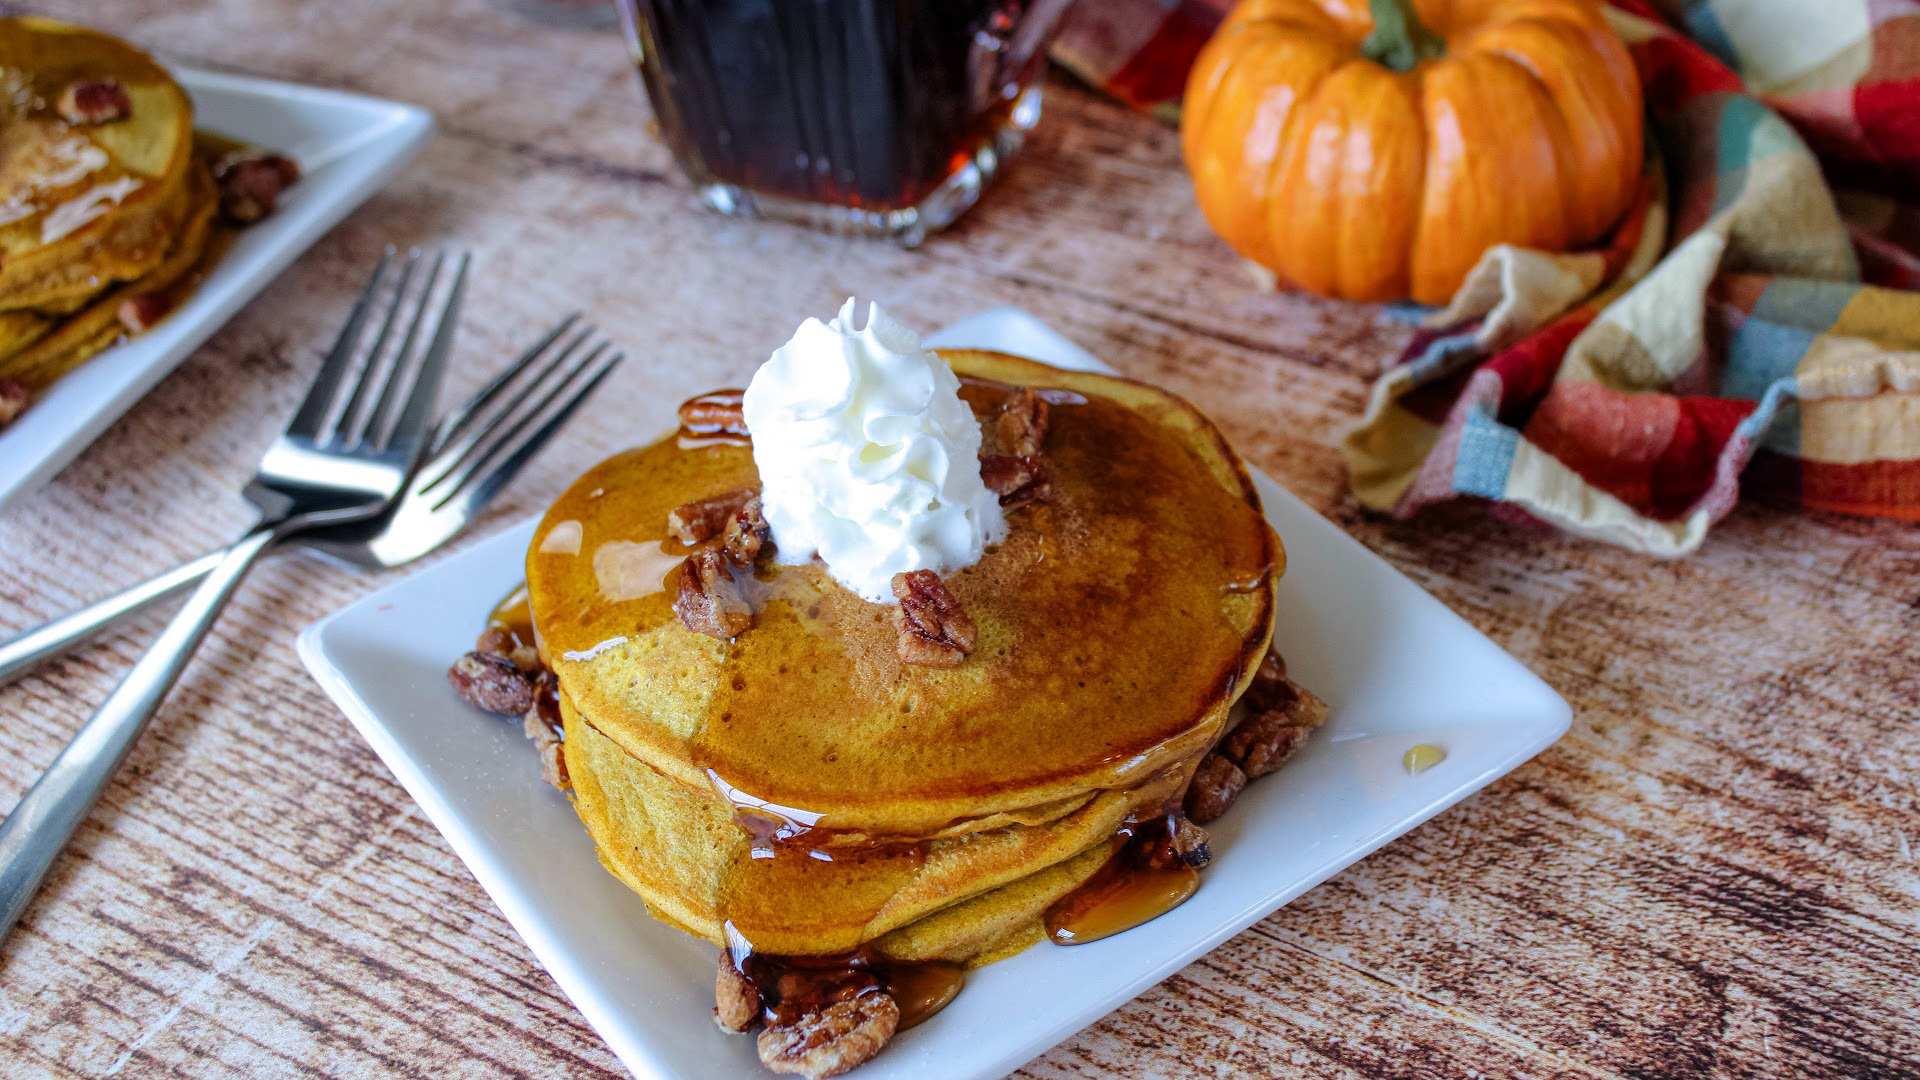 Light And Fluffy, These Pumpkin Pancakes Have Just The Right Hint Of Spice